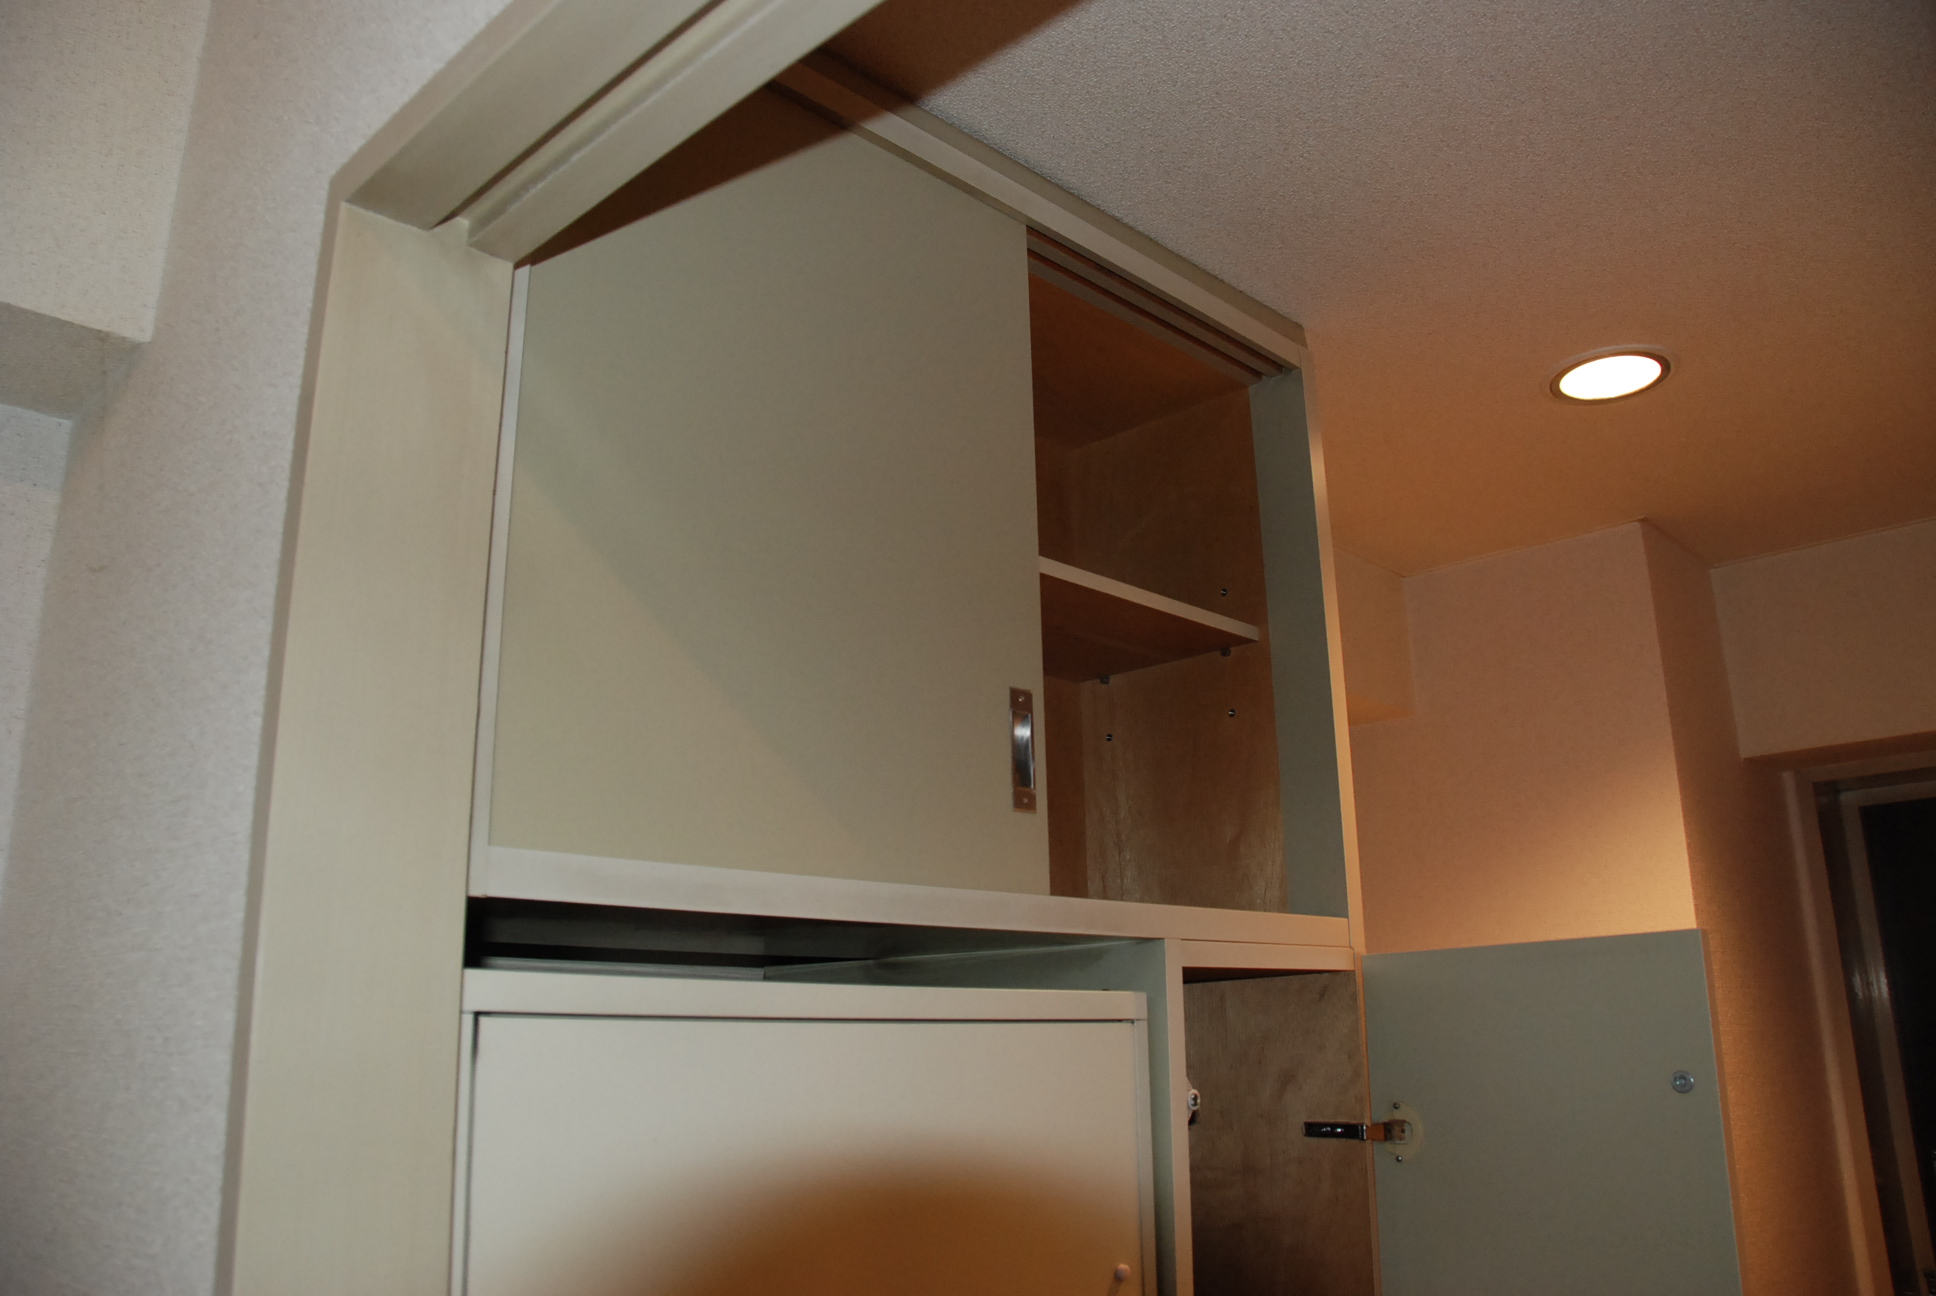 Living and room. Kitchen storage